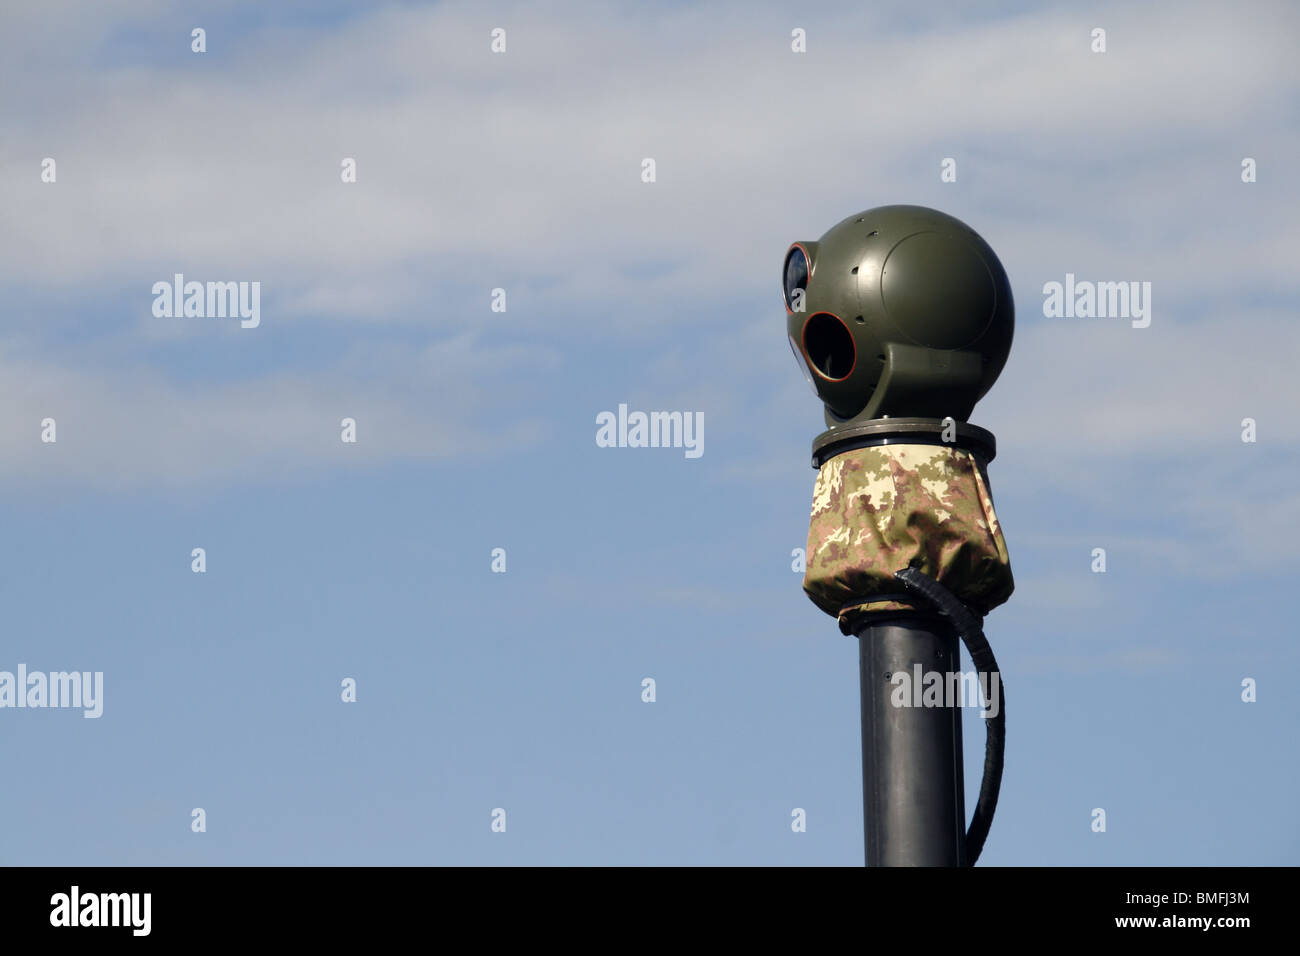 a military cctv surveillance camera at open day event Stock Photo